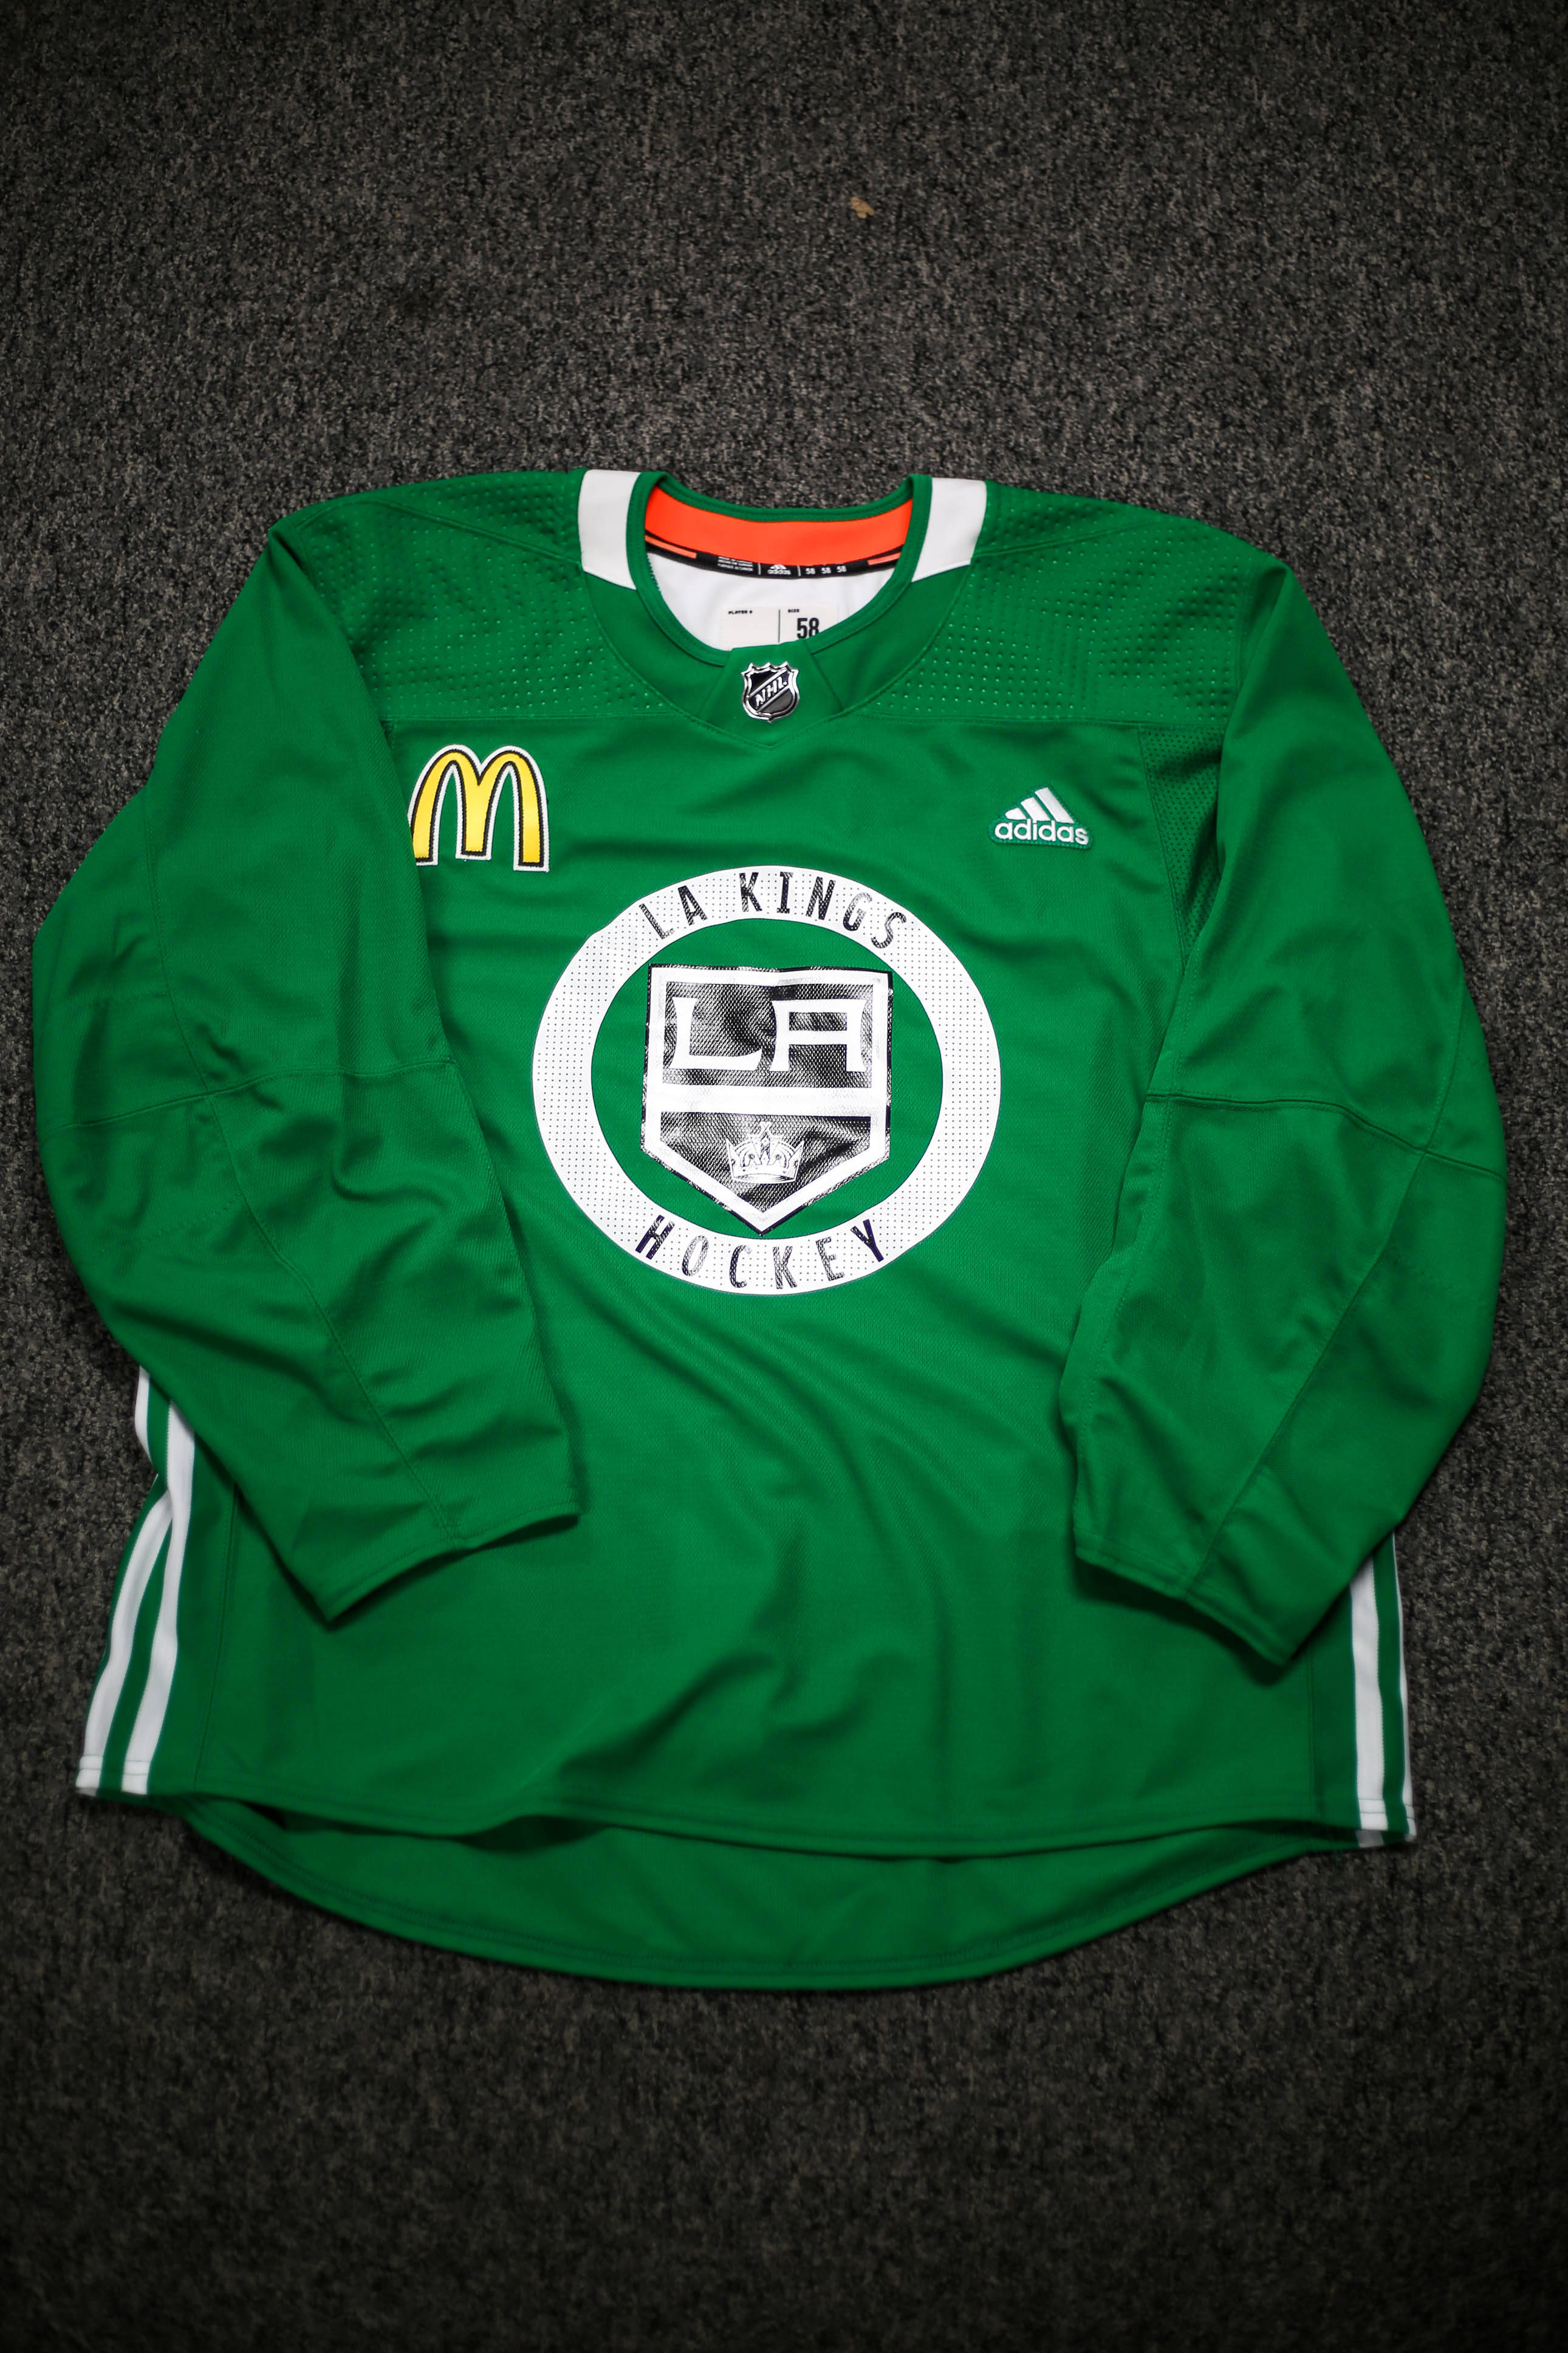 Bruins St. Patrick's Day Practice Jersey On Sale at Pro Shop